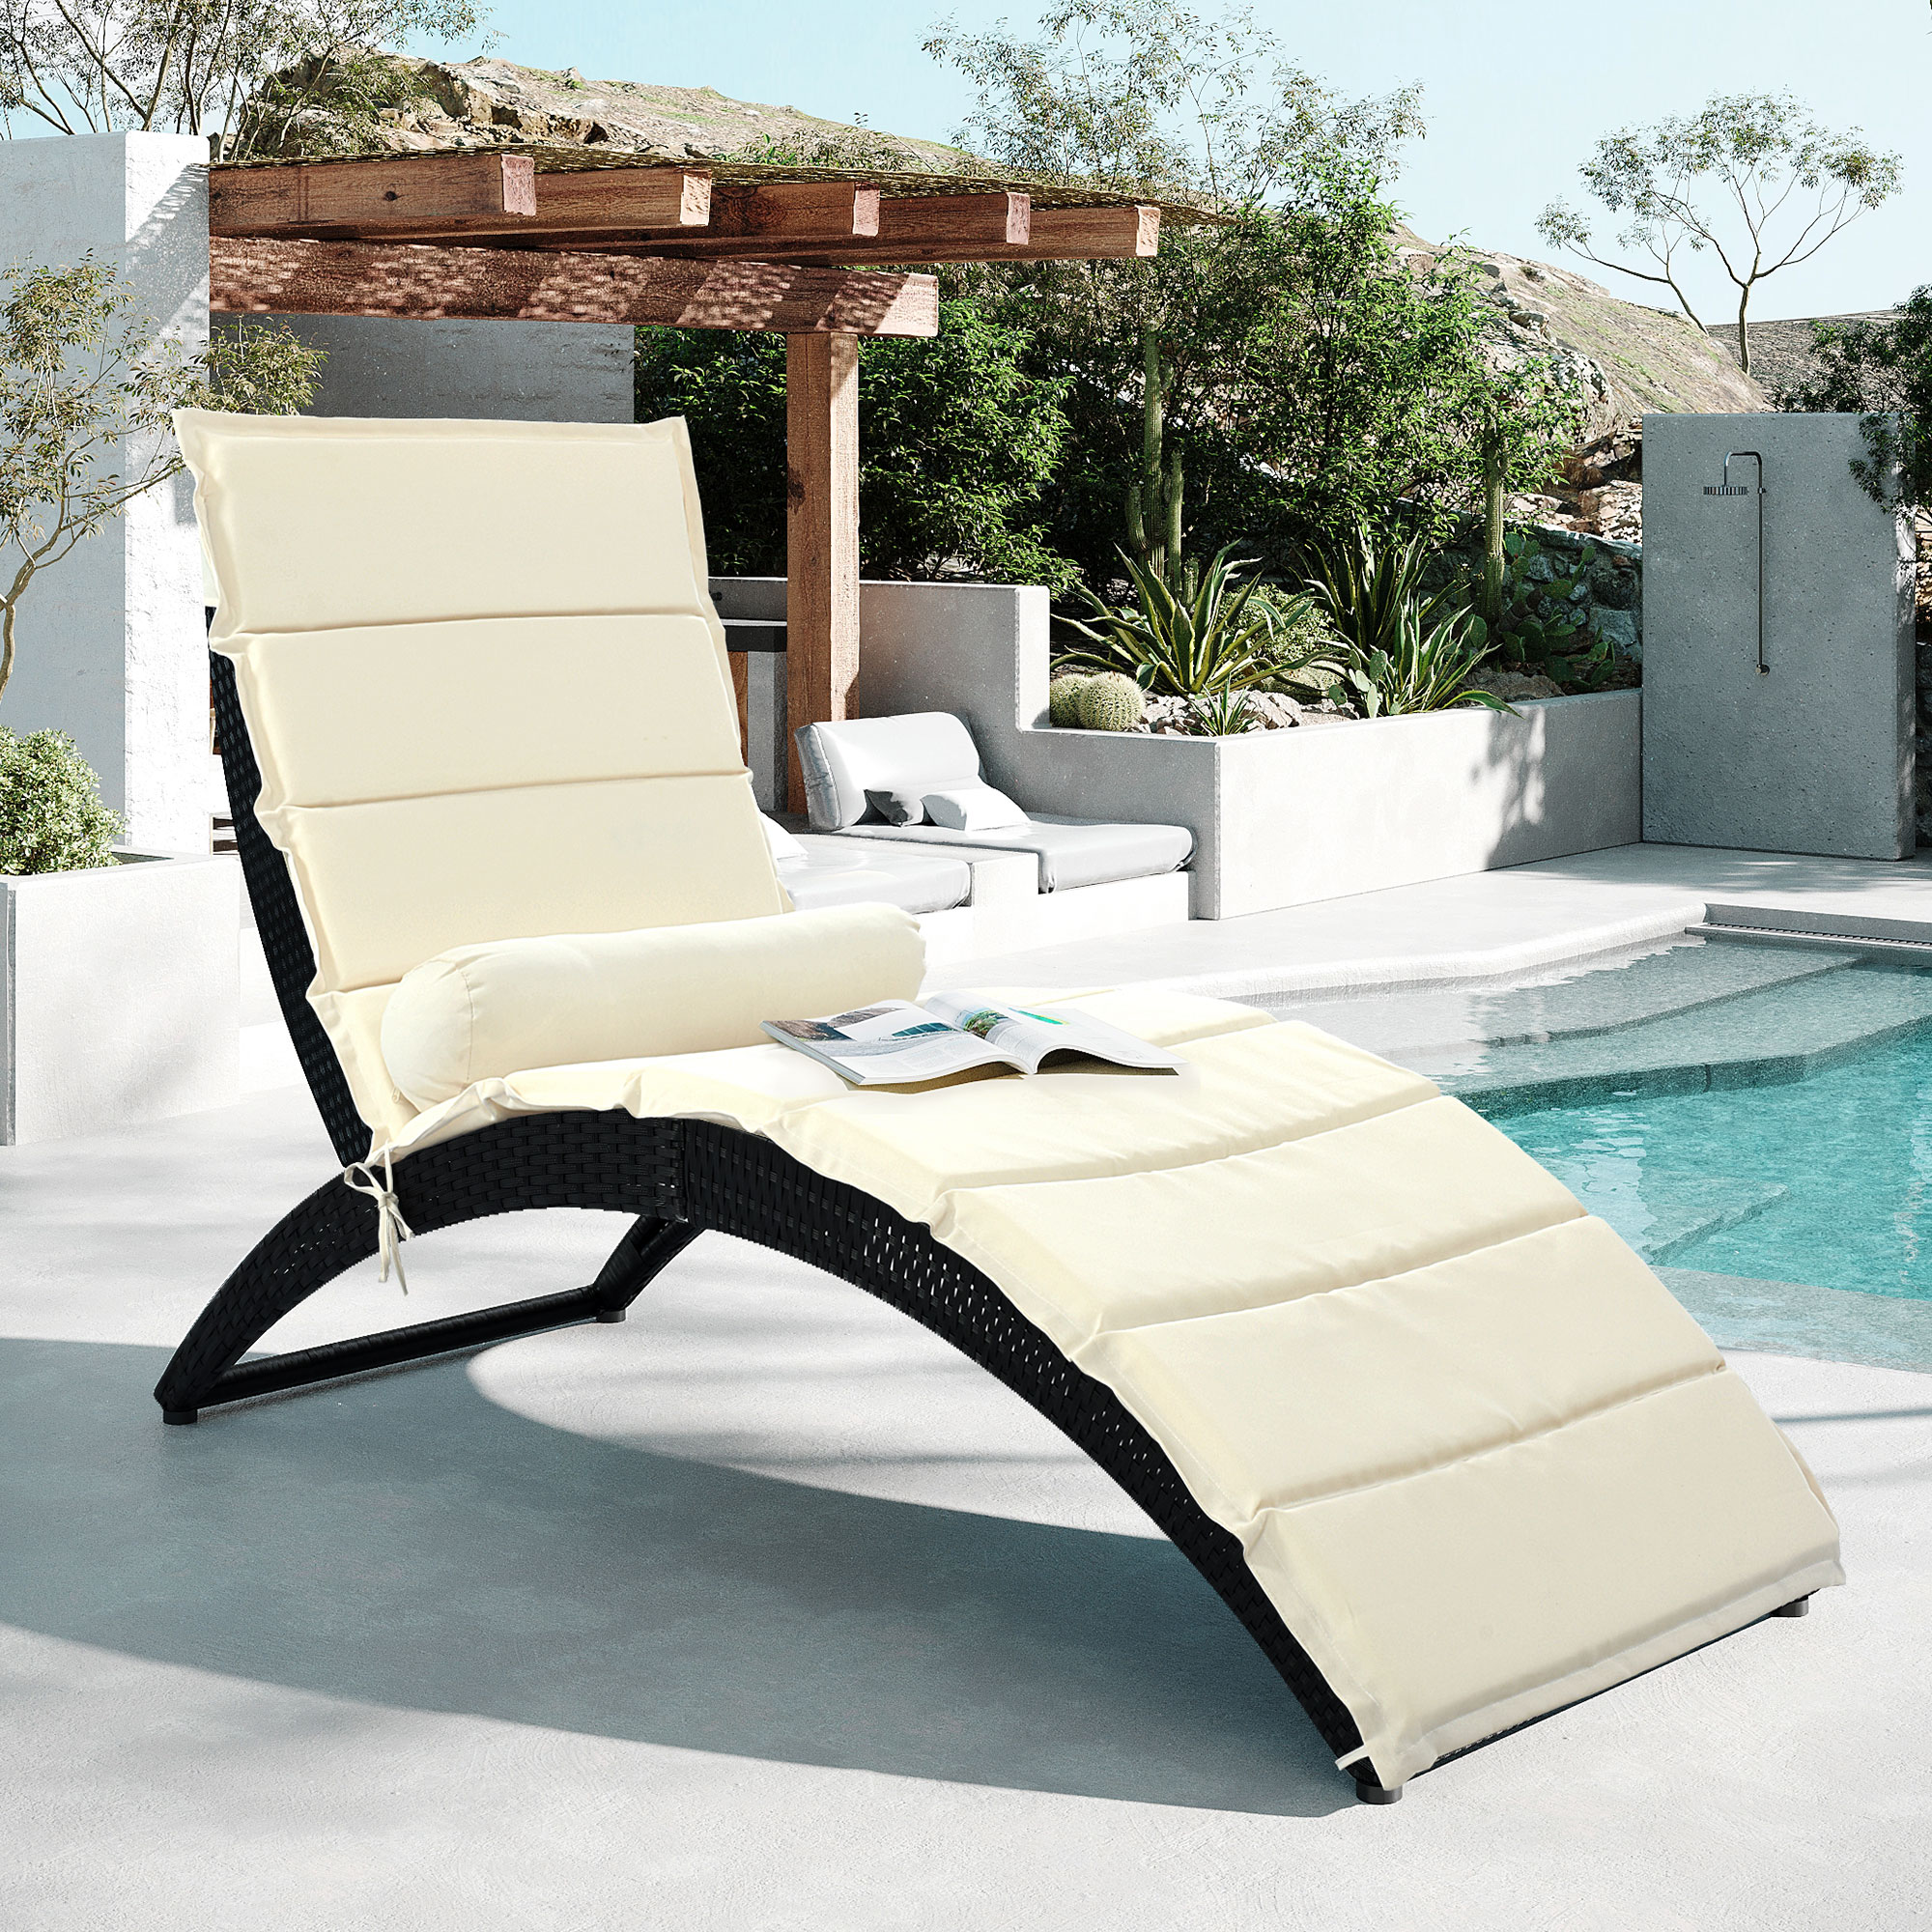 SYNGAR Patio Lounge Chair, Patio Chaise Lounges with Thickened Cushionand Bolster Pillow, PE Rattan Steel Frame Pool Lounge Chair for Patio Backyard Porch Garden Poolside, Beige - image 2 of 10